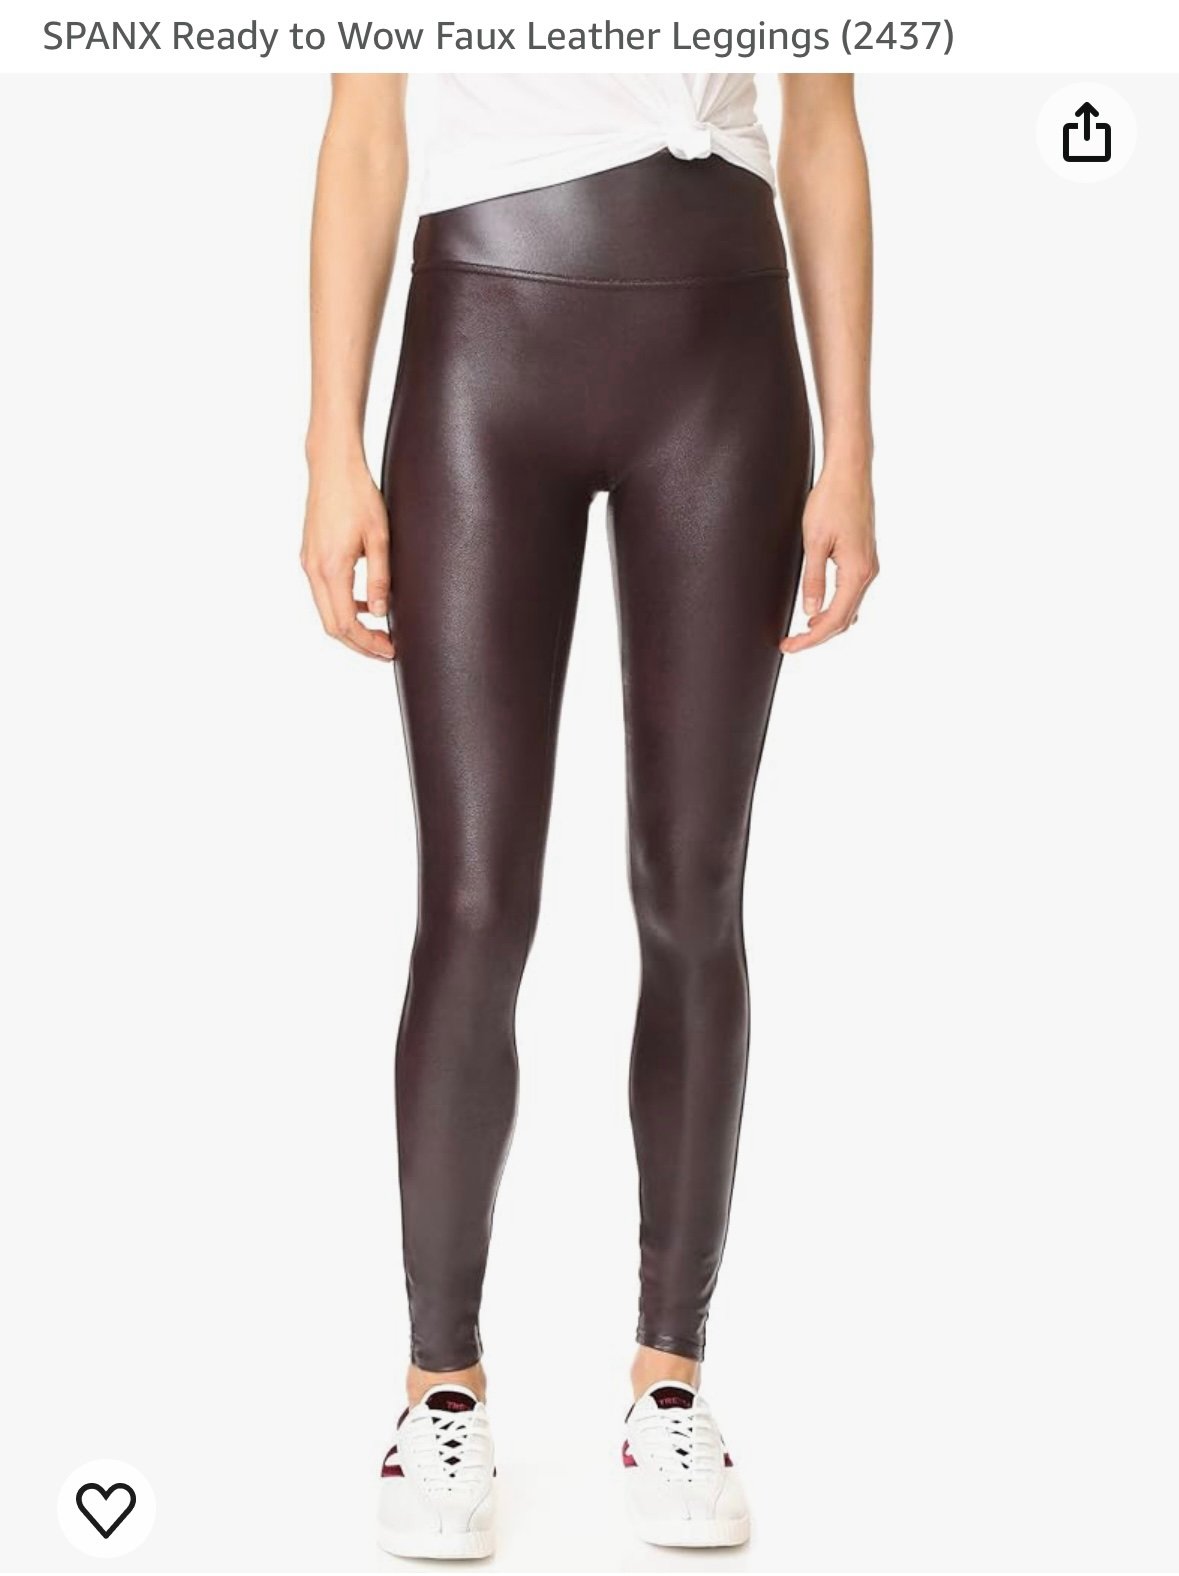 Stylish SPANX READY-TO-WOW FAUX LEATHER LEGGINGS WOMENS SMALL WINE/PURPLE COLOR hgzbYbZCy well sale